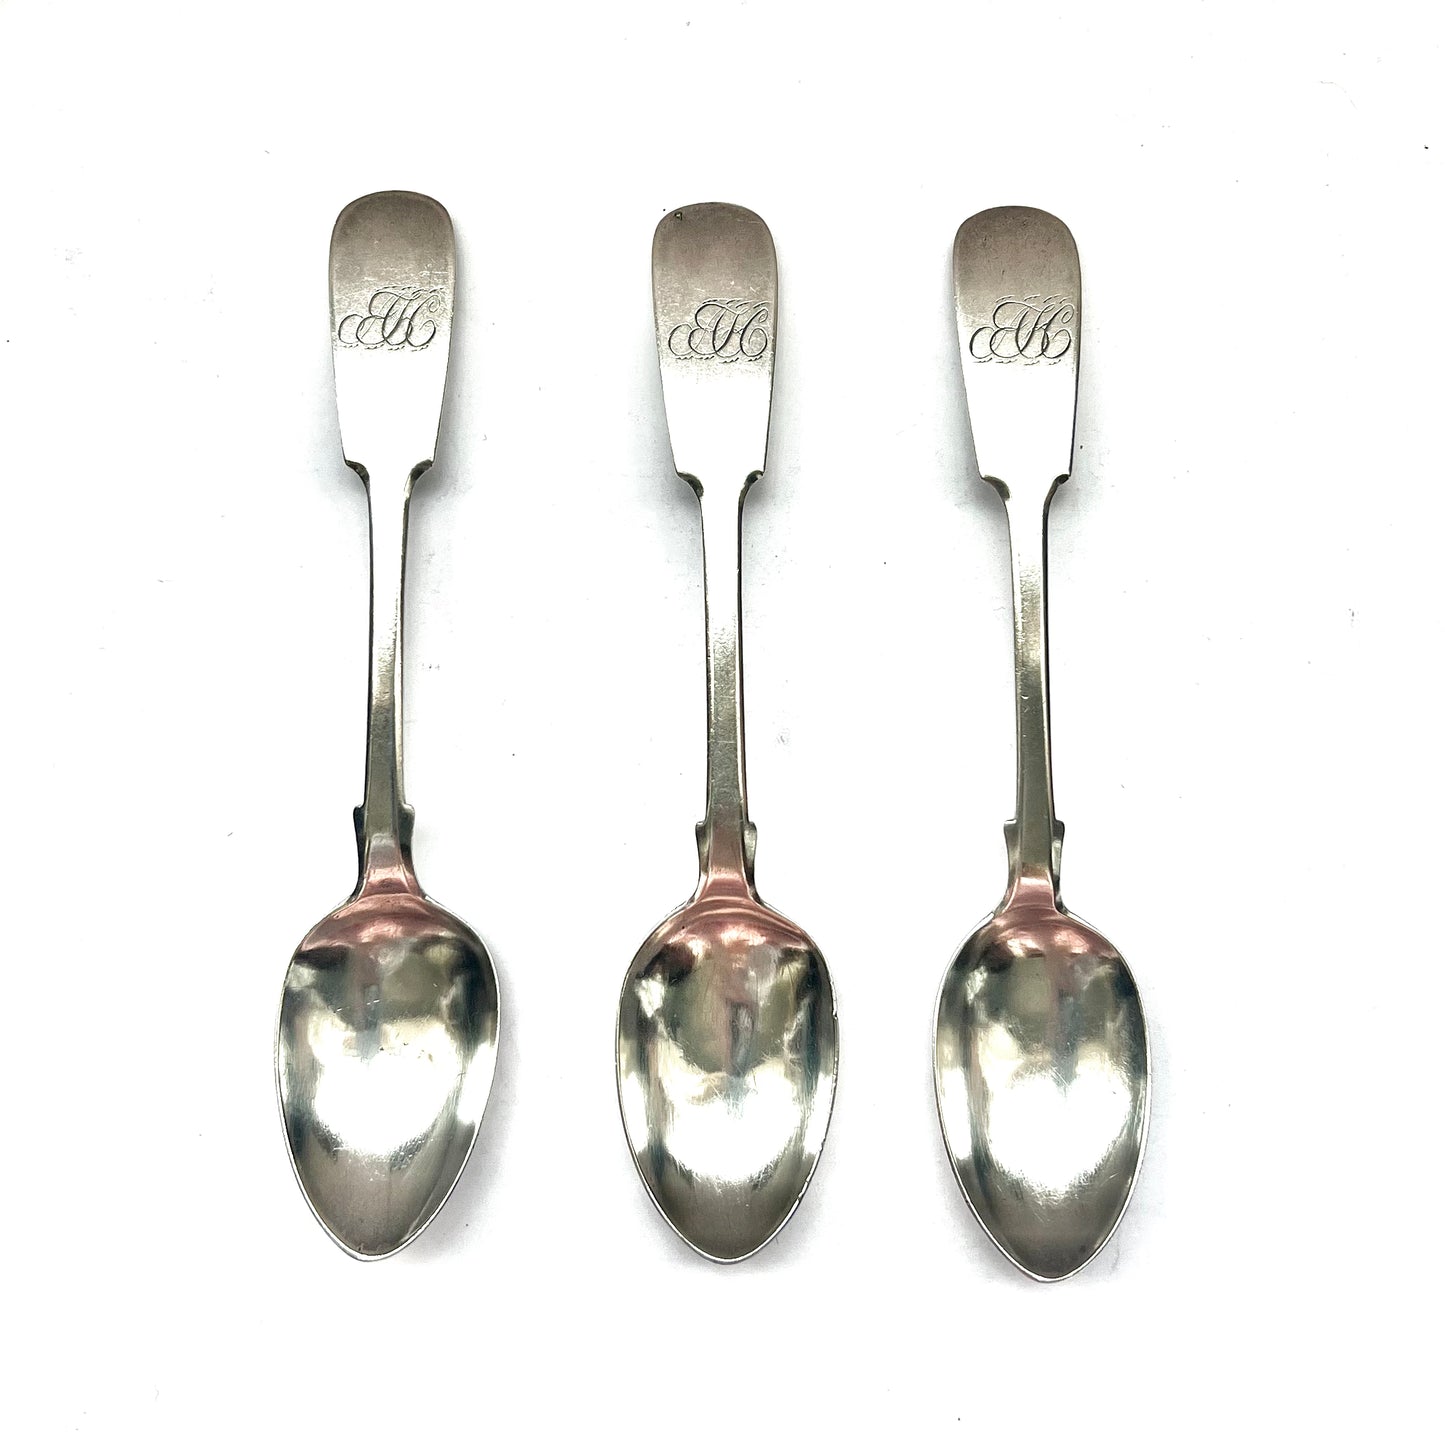 3 William IV English provincial silver spoons with marks for Thomas Wheatley, Newcastle, 1834.